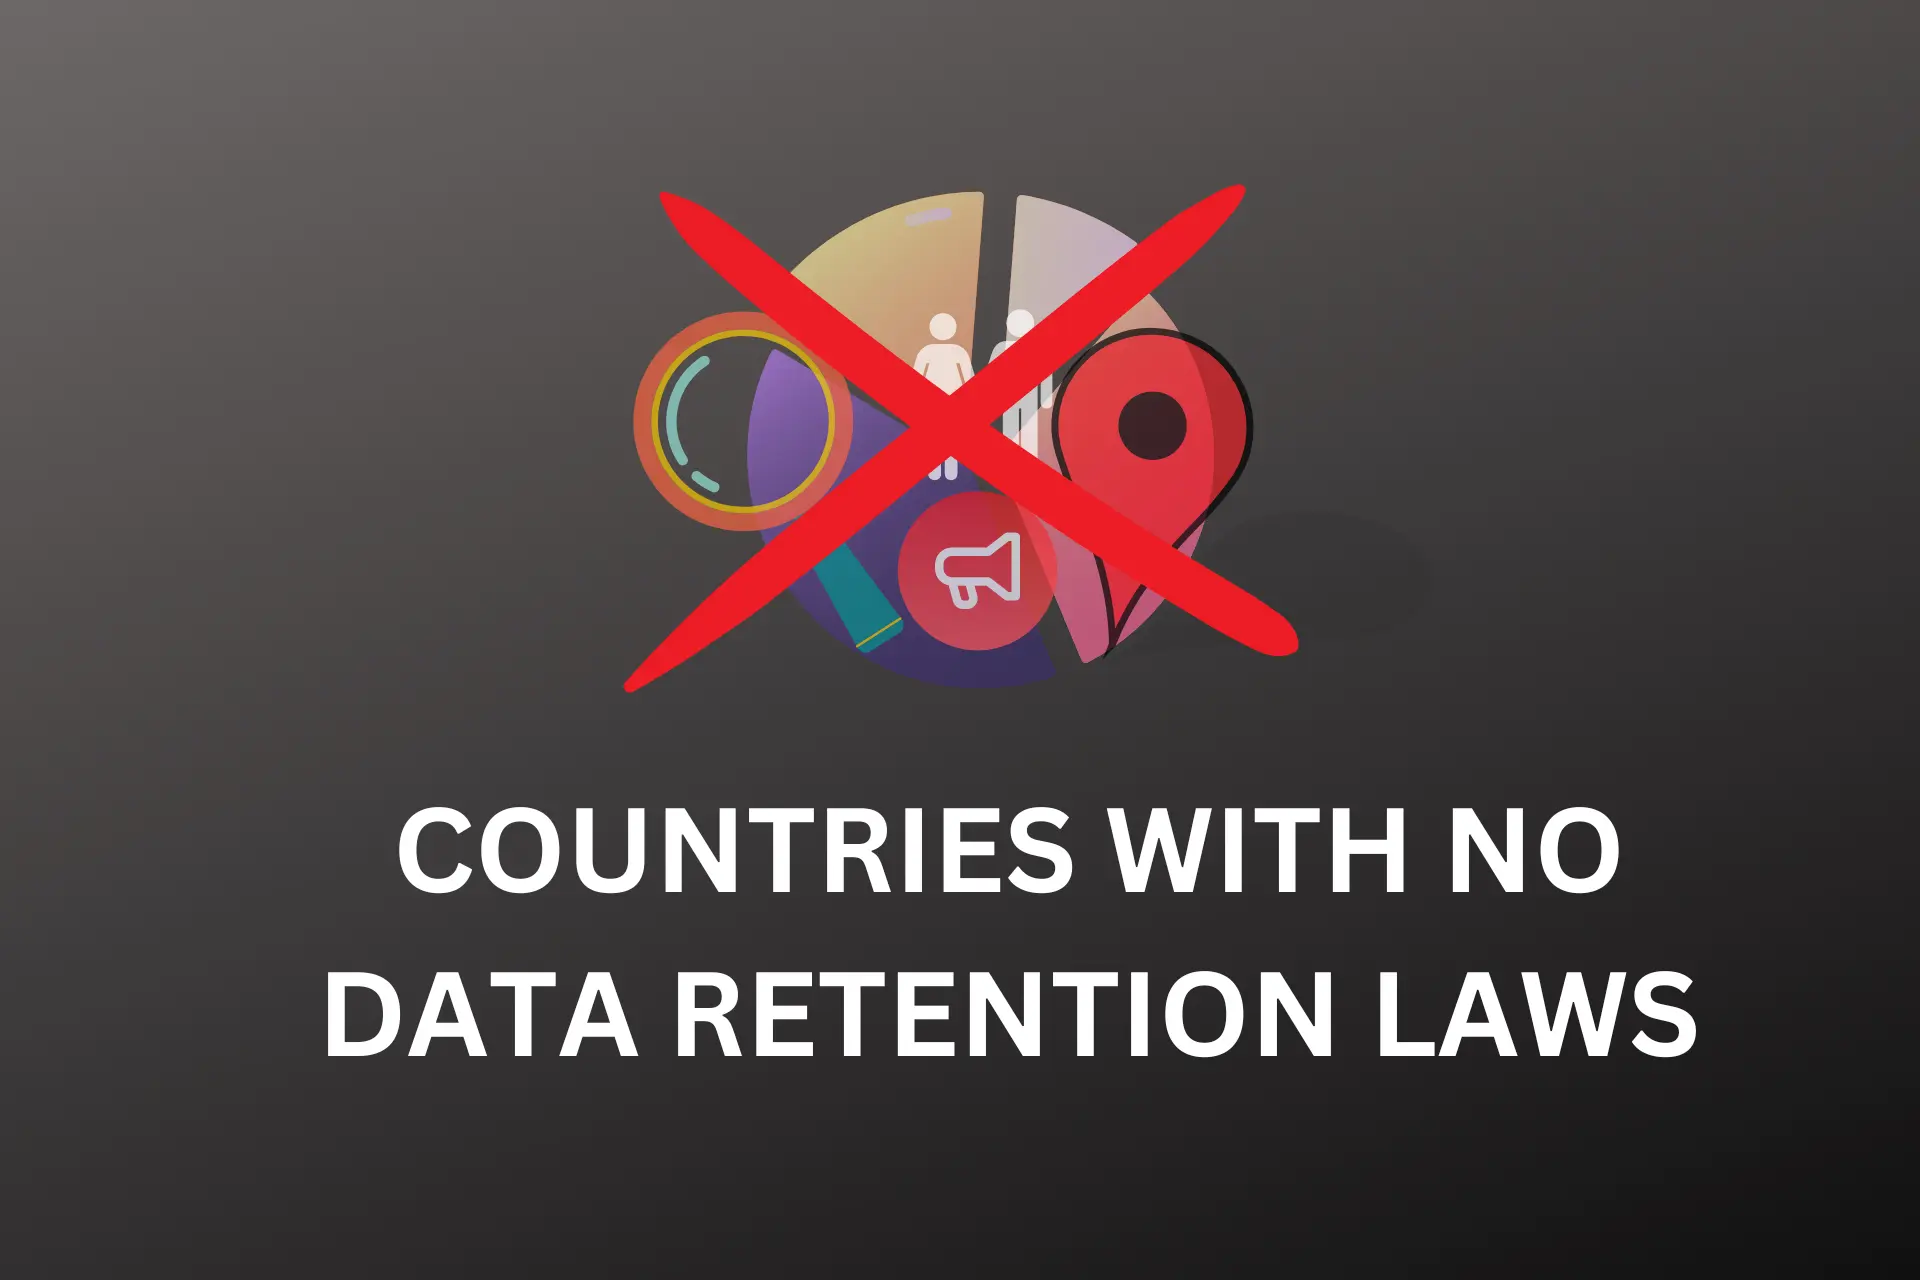 COUNTRIES WITH NO DATA RETENTION LAWS